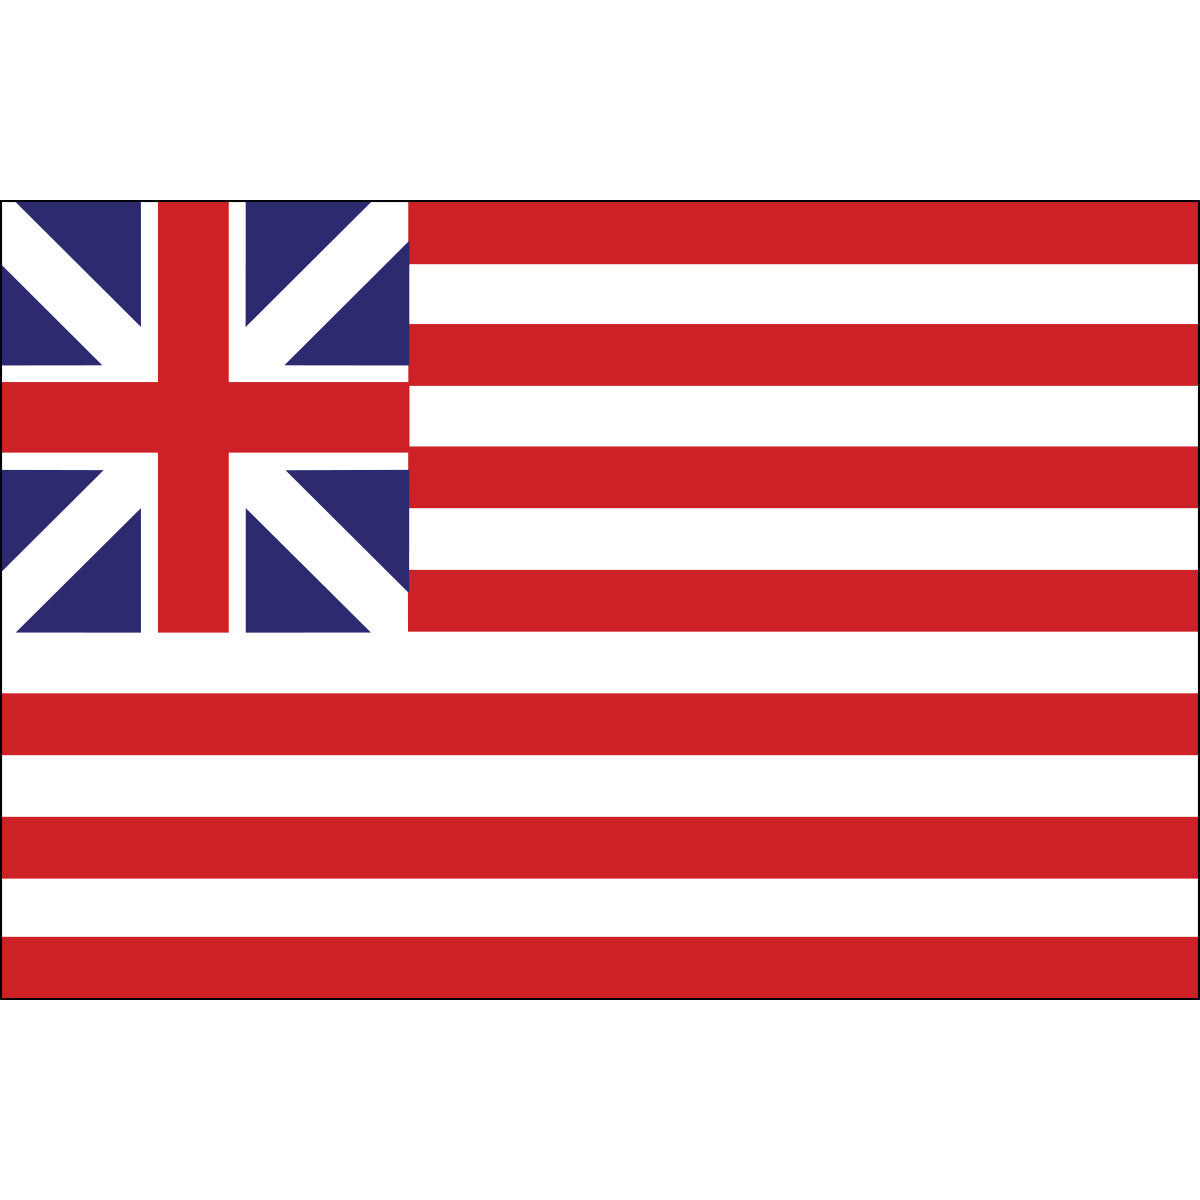 Grand Union Flags